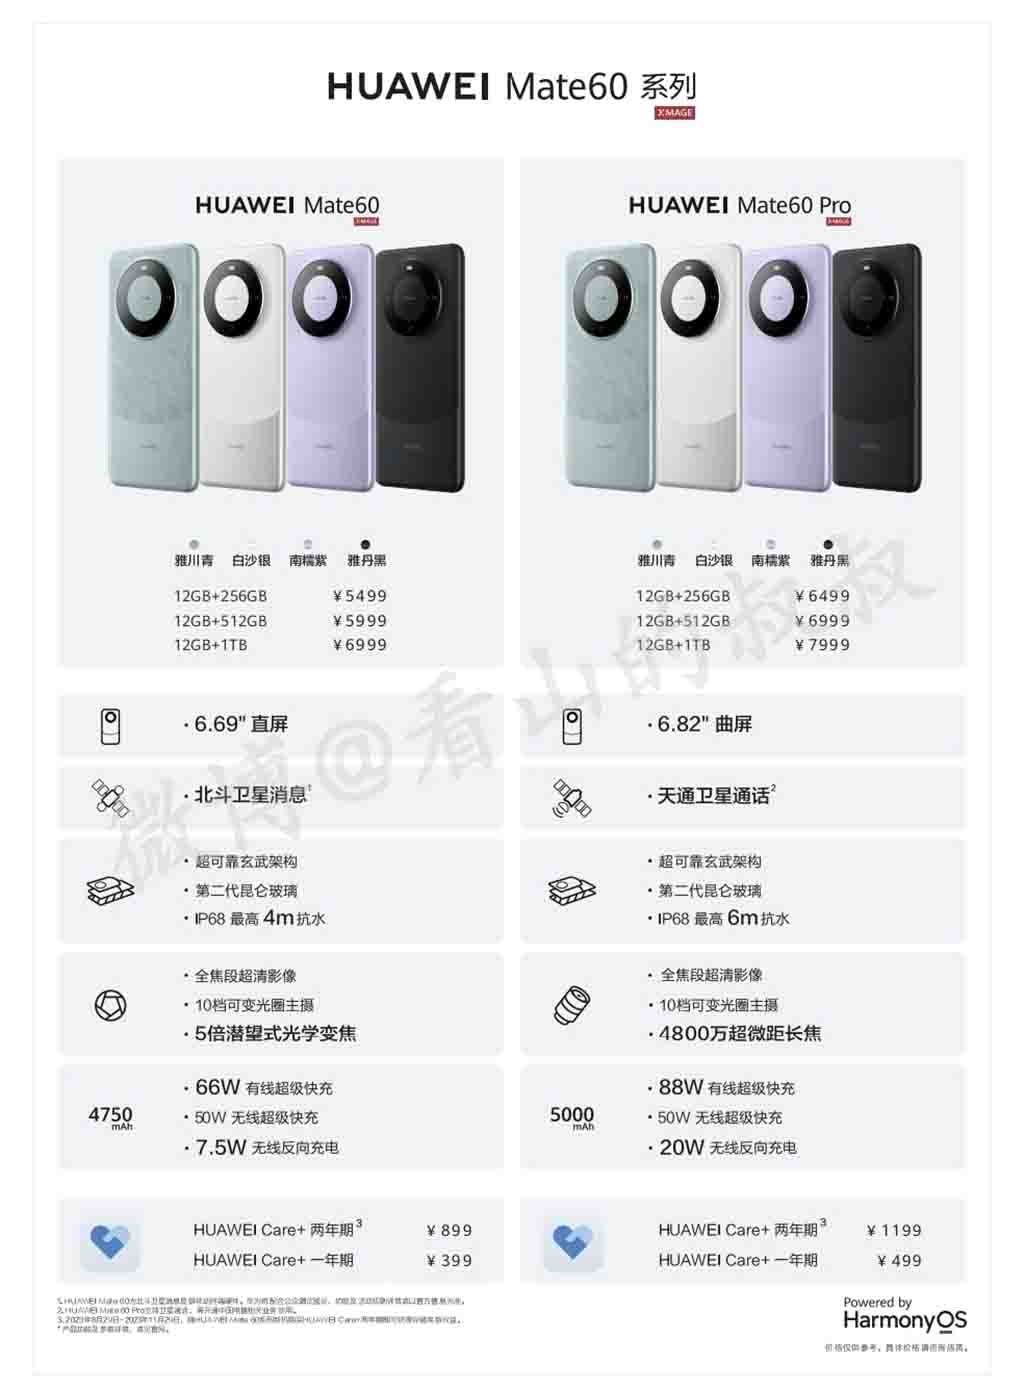 Leak reveals pricing for Huawei Mate 60 and 60 Pro variants - Huawei Central